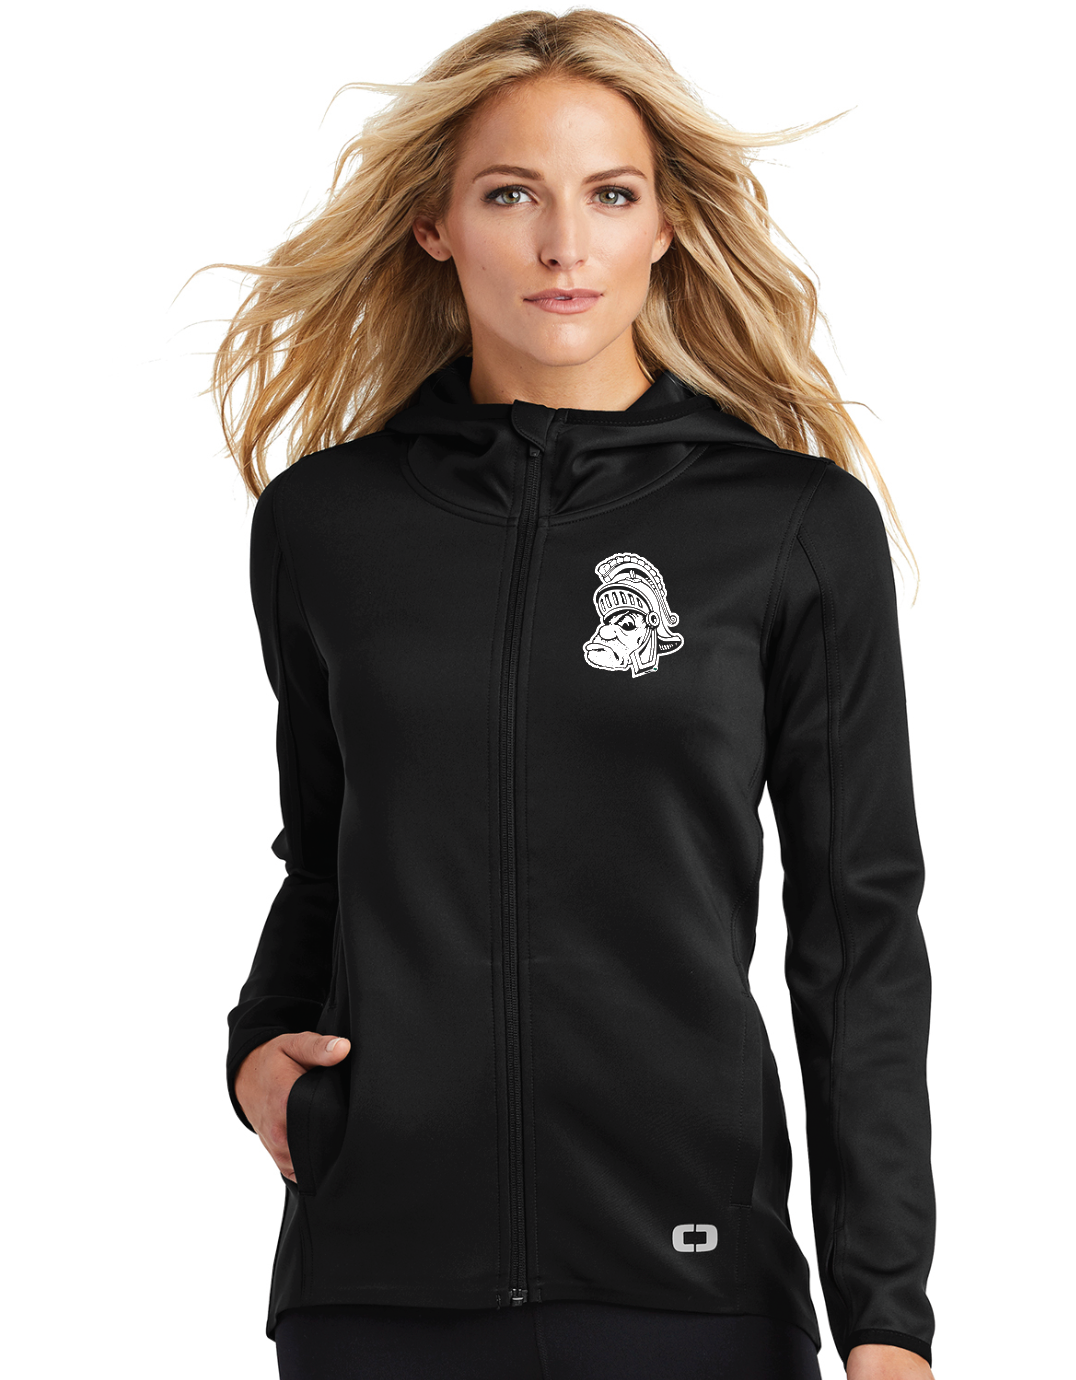 Women's Michigan State Hoodie with Gruff Sparty Logo